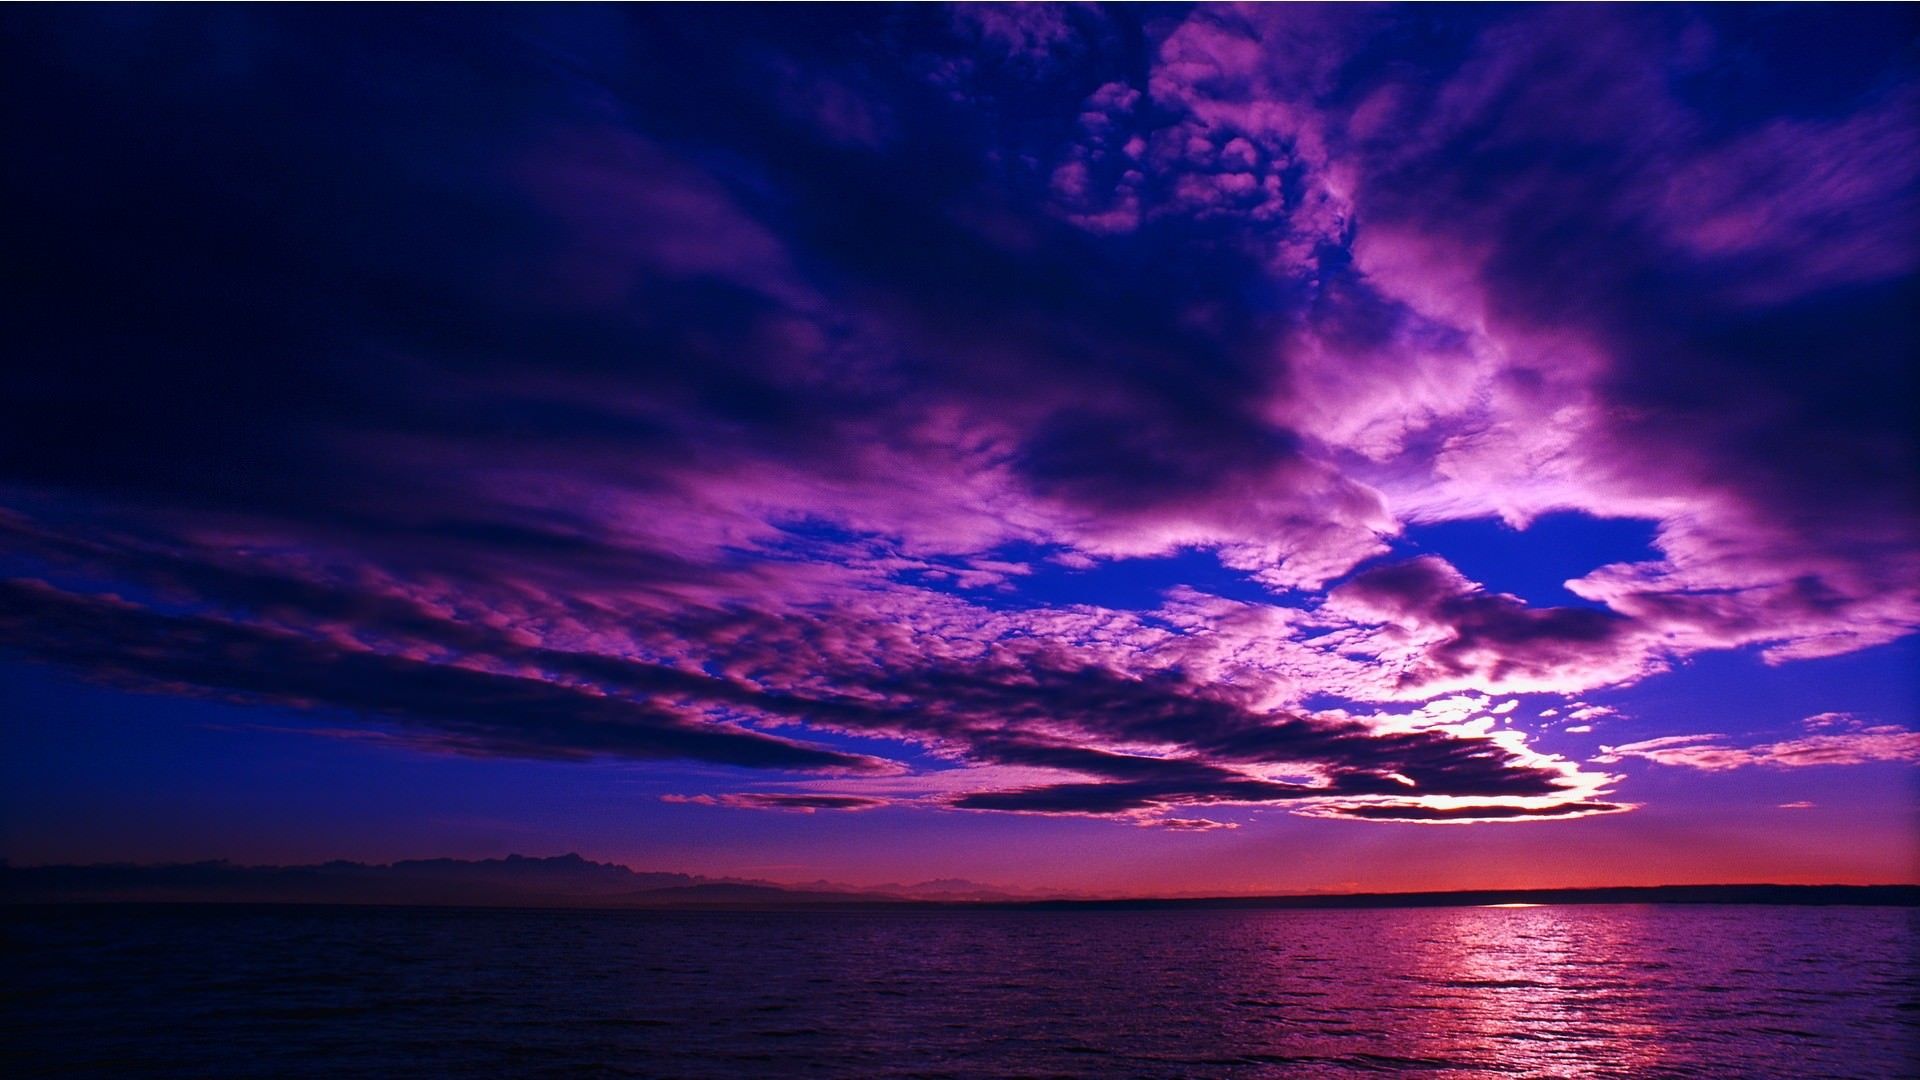 Gorgeous purple and blue sunset [1920x1080]